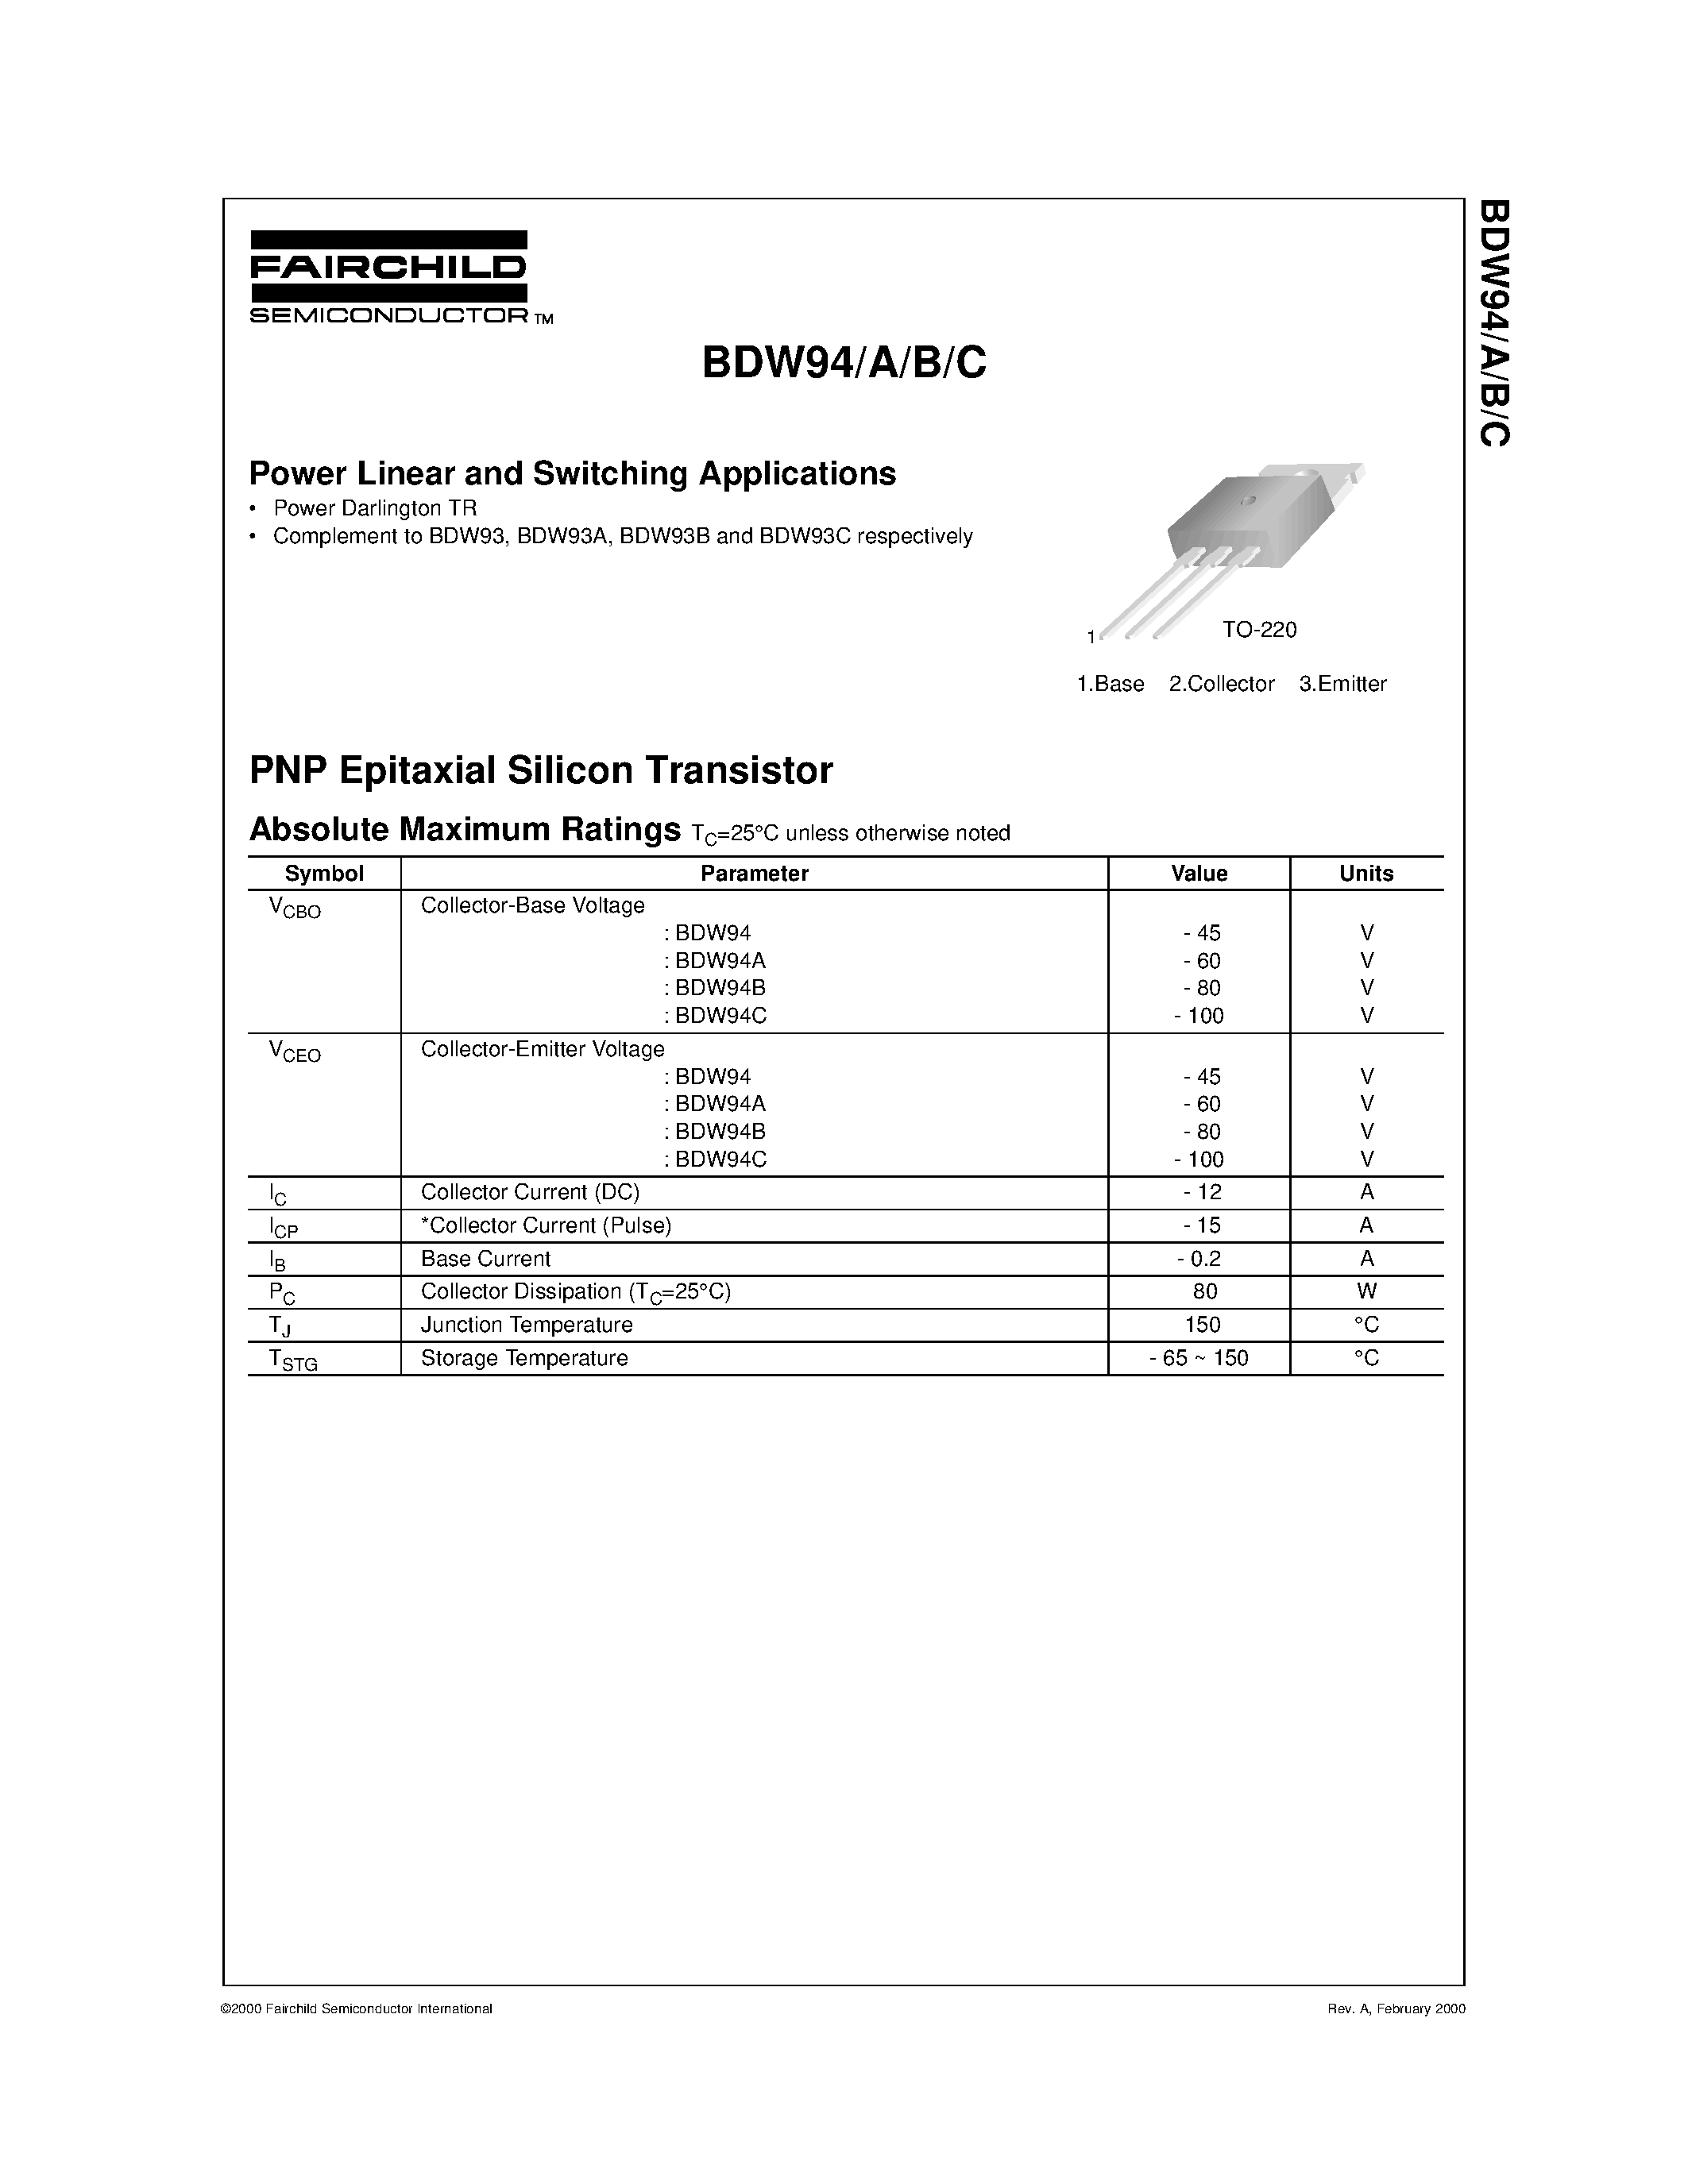 Datasheet BDW94A - Power Linear and Switching Applications page 1